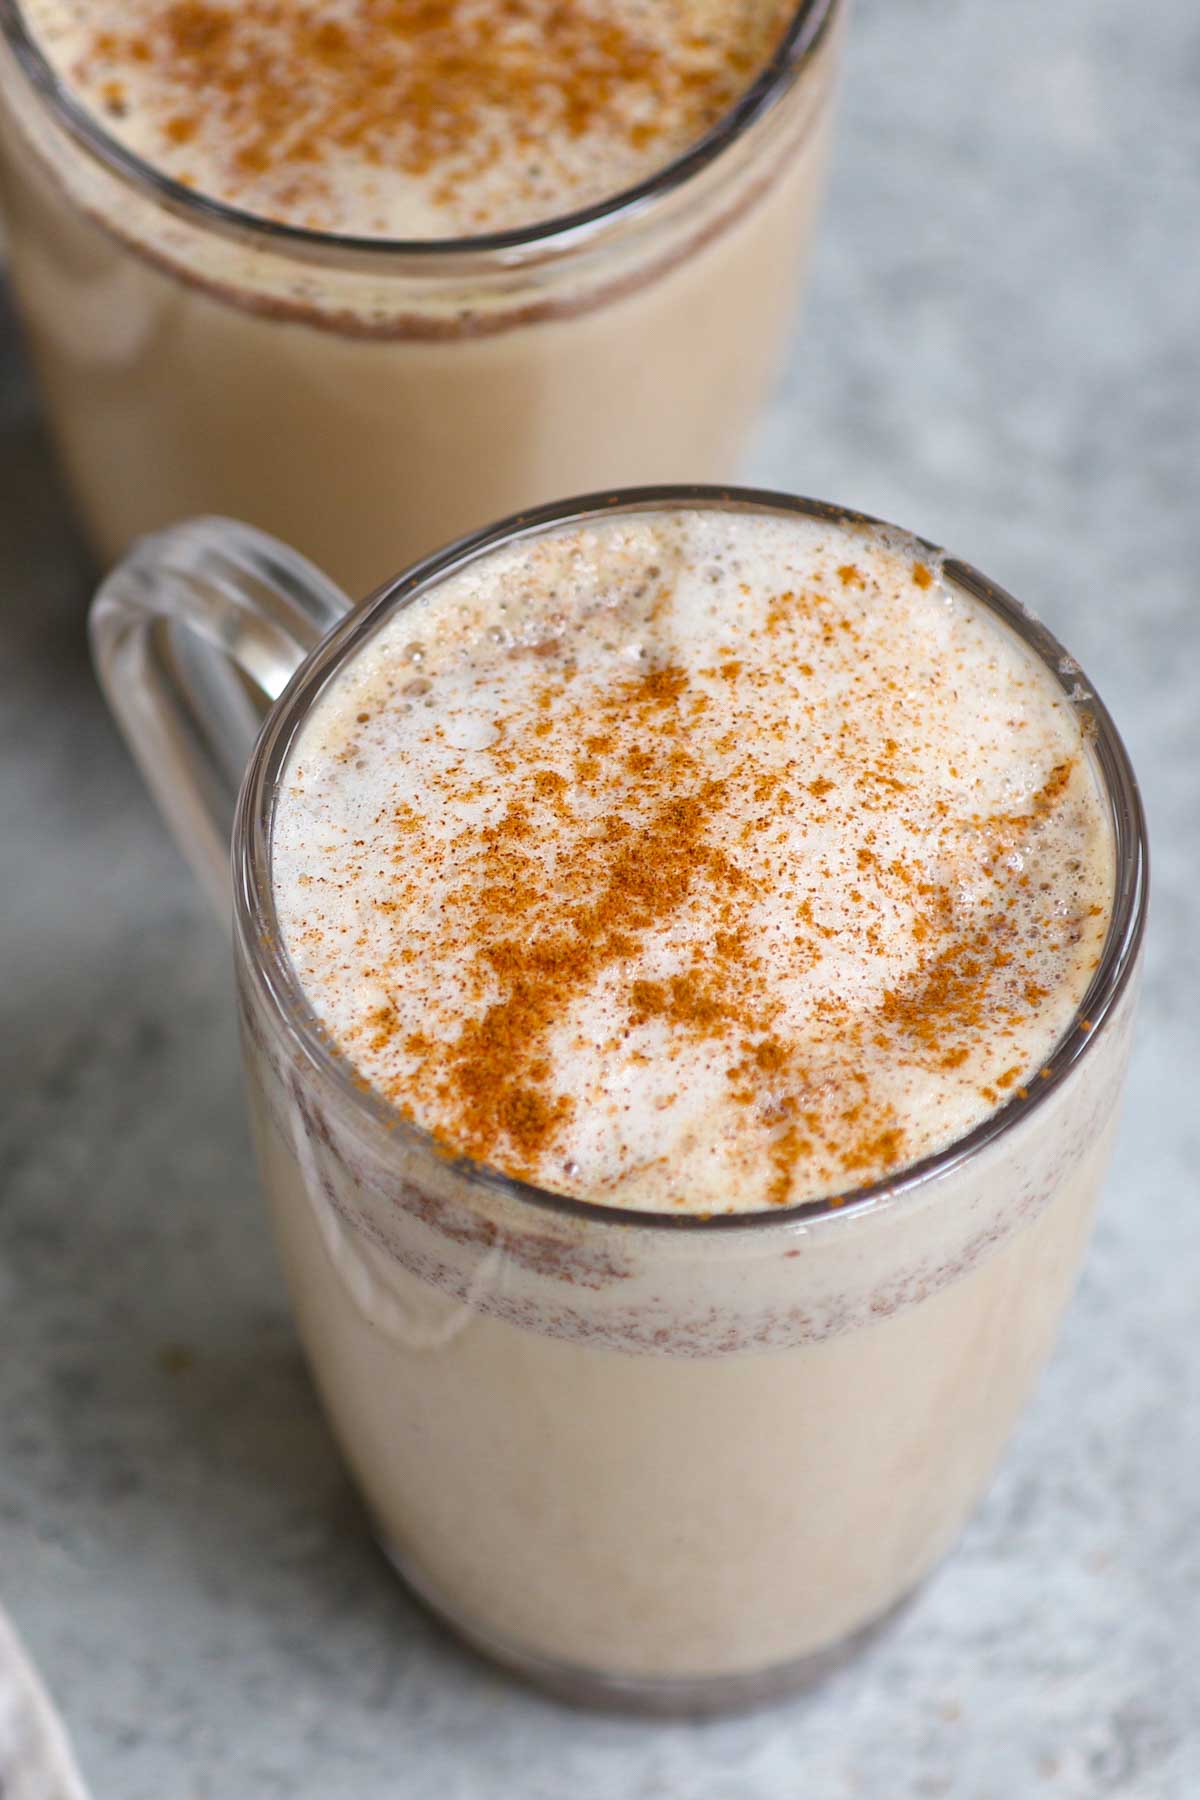 This homemade Starbucks copycat Chai Tea Latte gives you all the delicious flavor of the store-bought drink at the fraction of the price. It’s a caffeinated latte that makes the perfect warm drink on a cool day, and equally as good iced too. You can now save money and make this easy recipe at home with a few simple ingredients. 